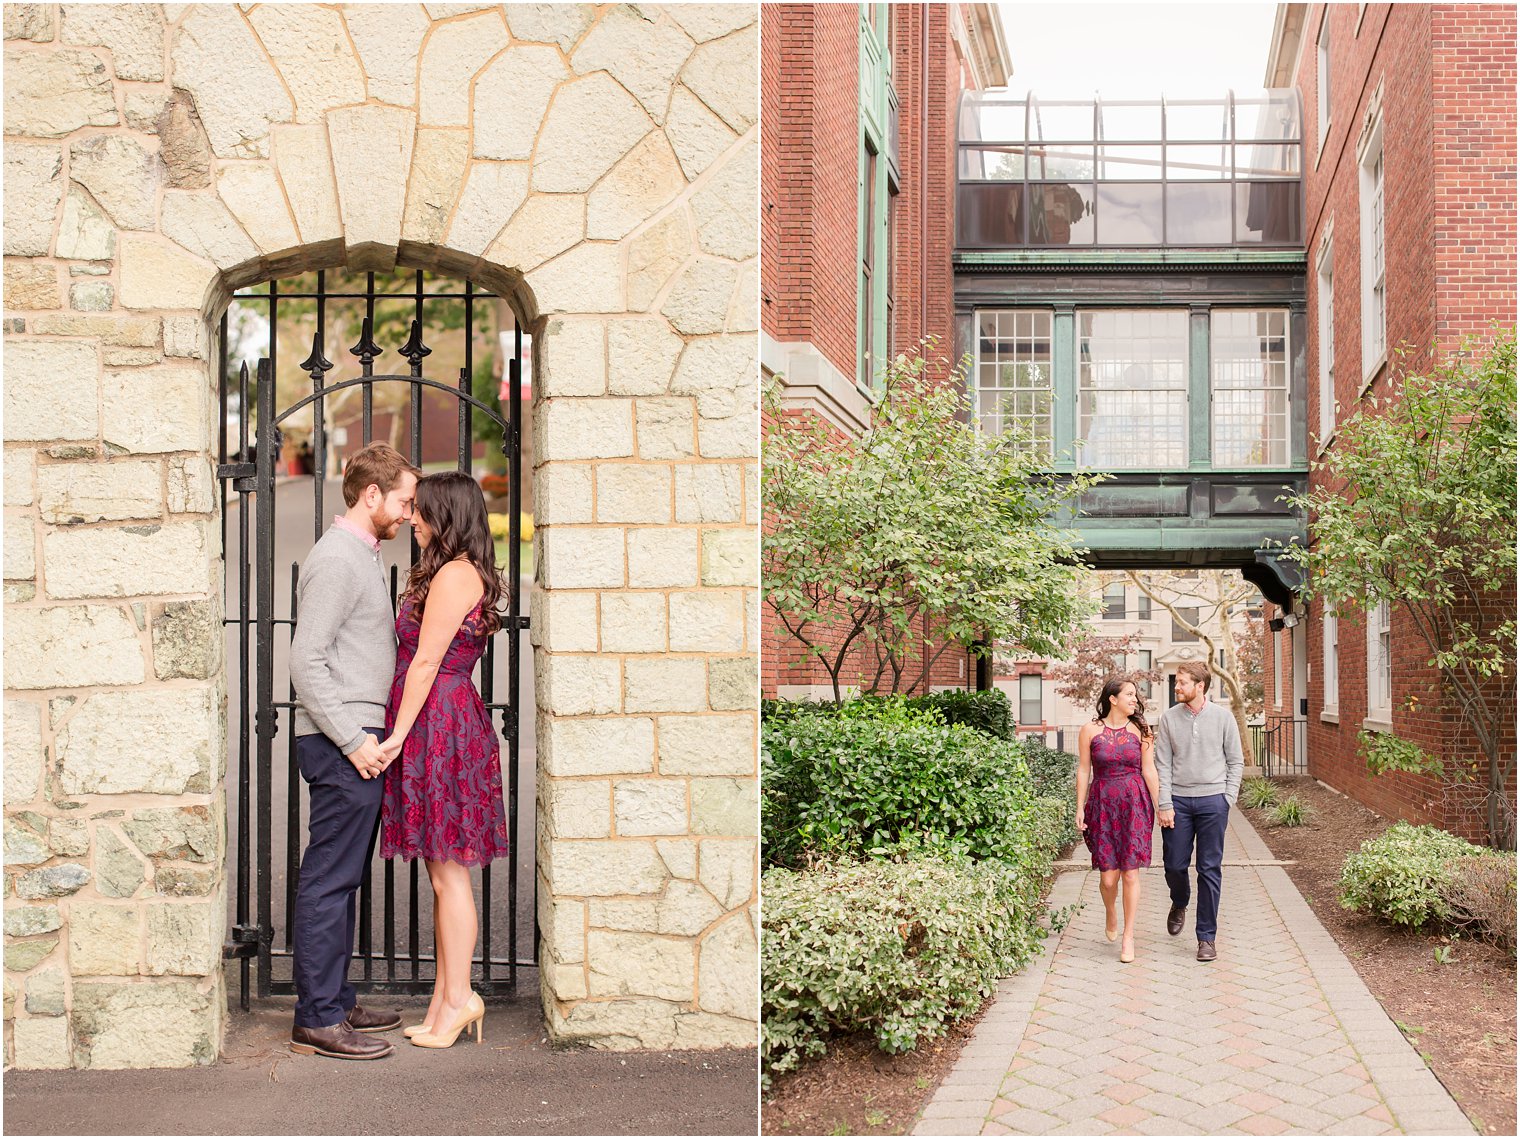 Engaged couple on Stevens Institute campus